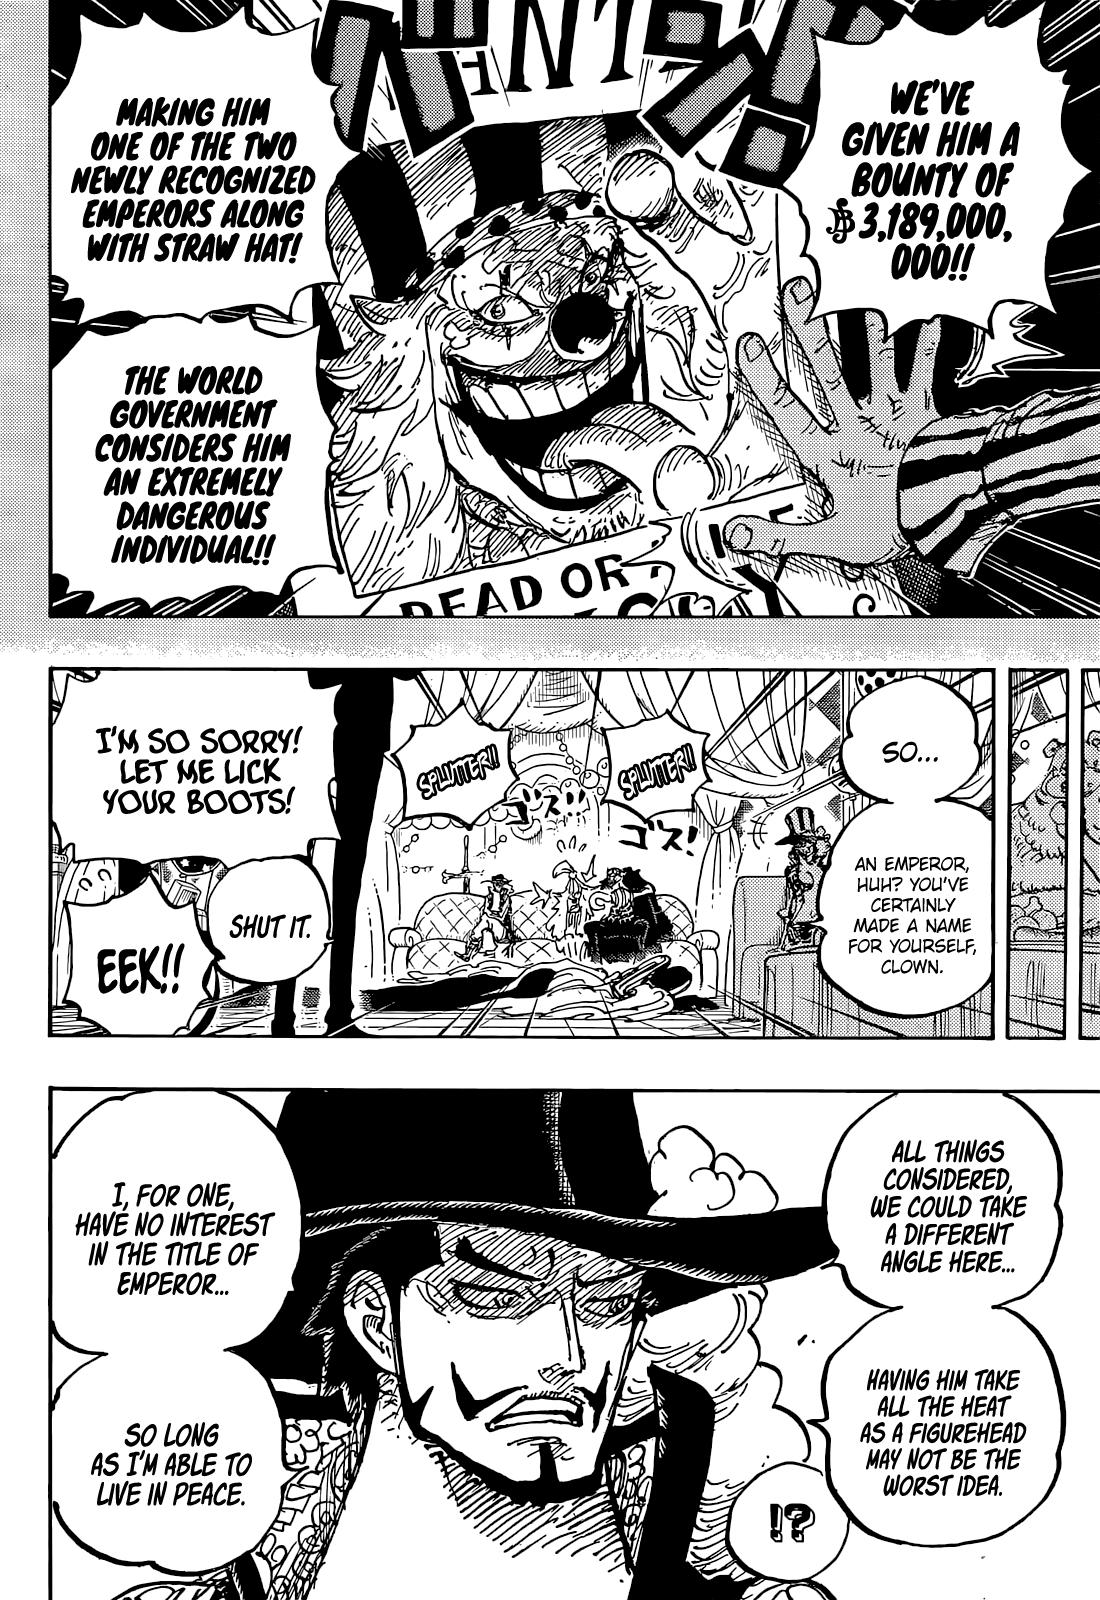 One Piece Chapter 1058 Spoilers: Mihawk & Strawhat Pirates New Bounties  Revealed